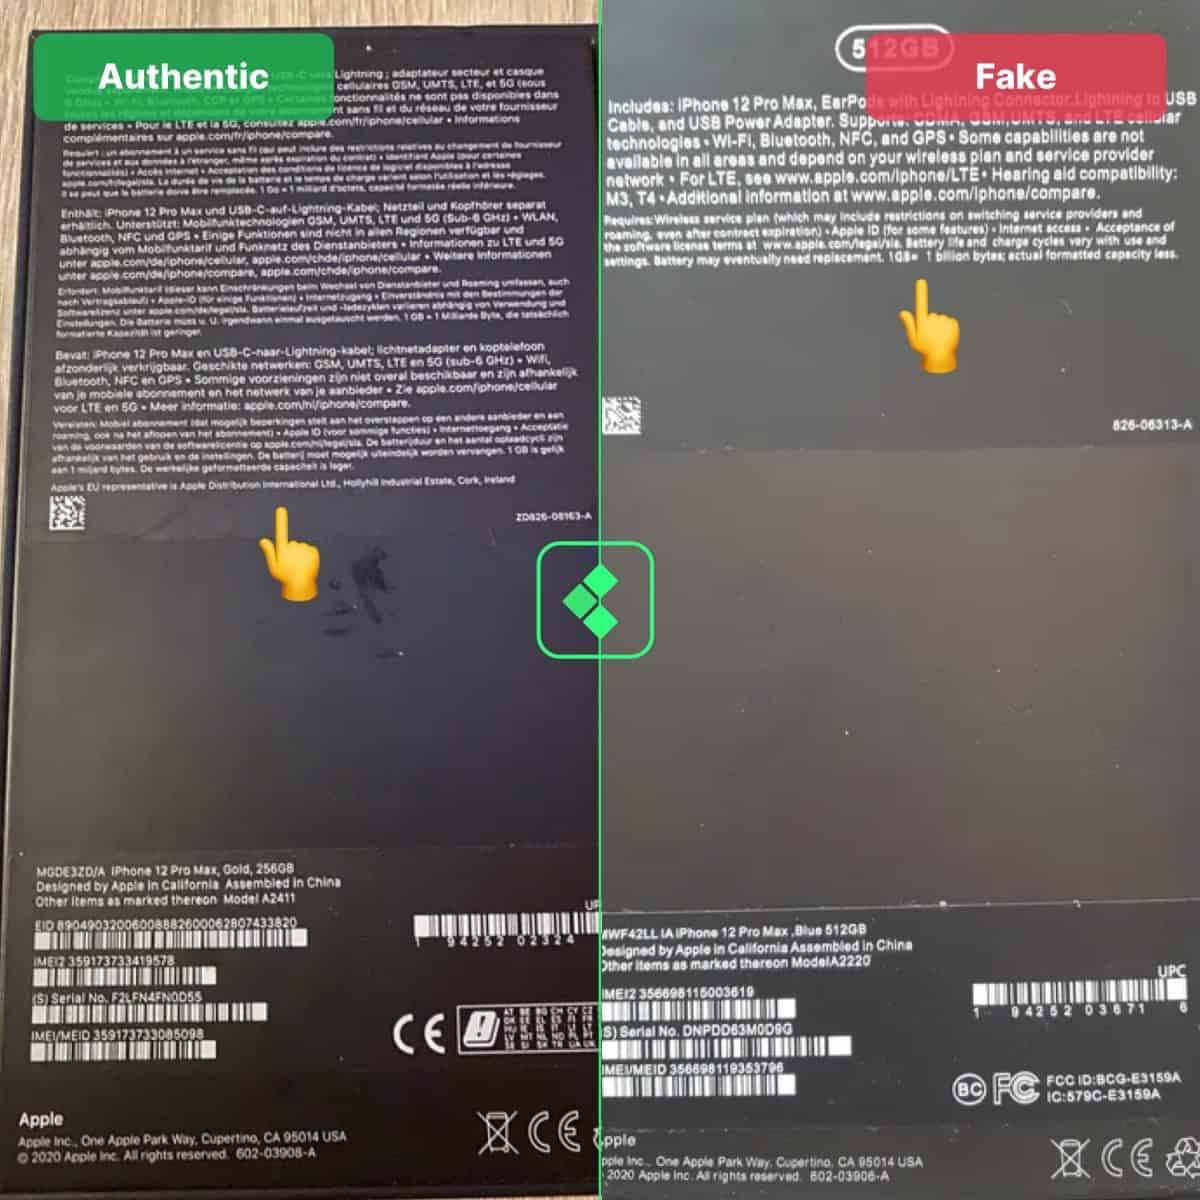 how to spot fake iphone 12 pro max